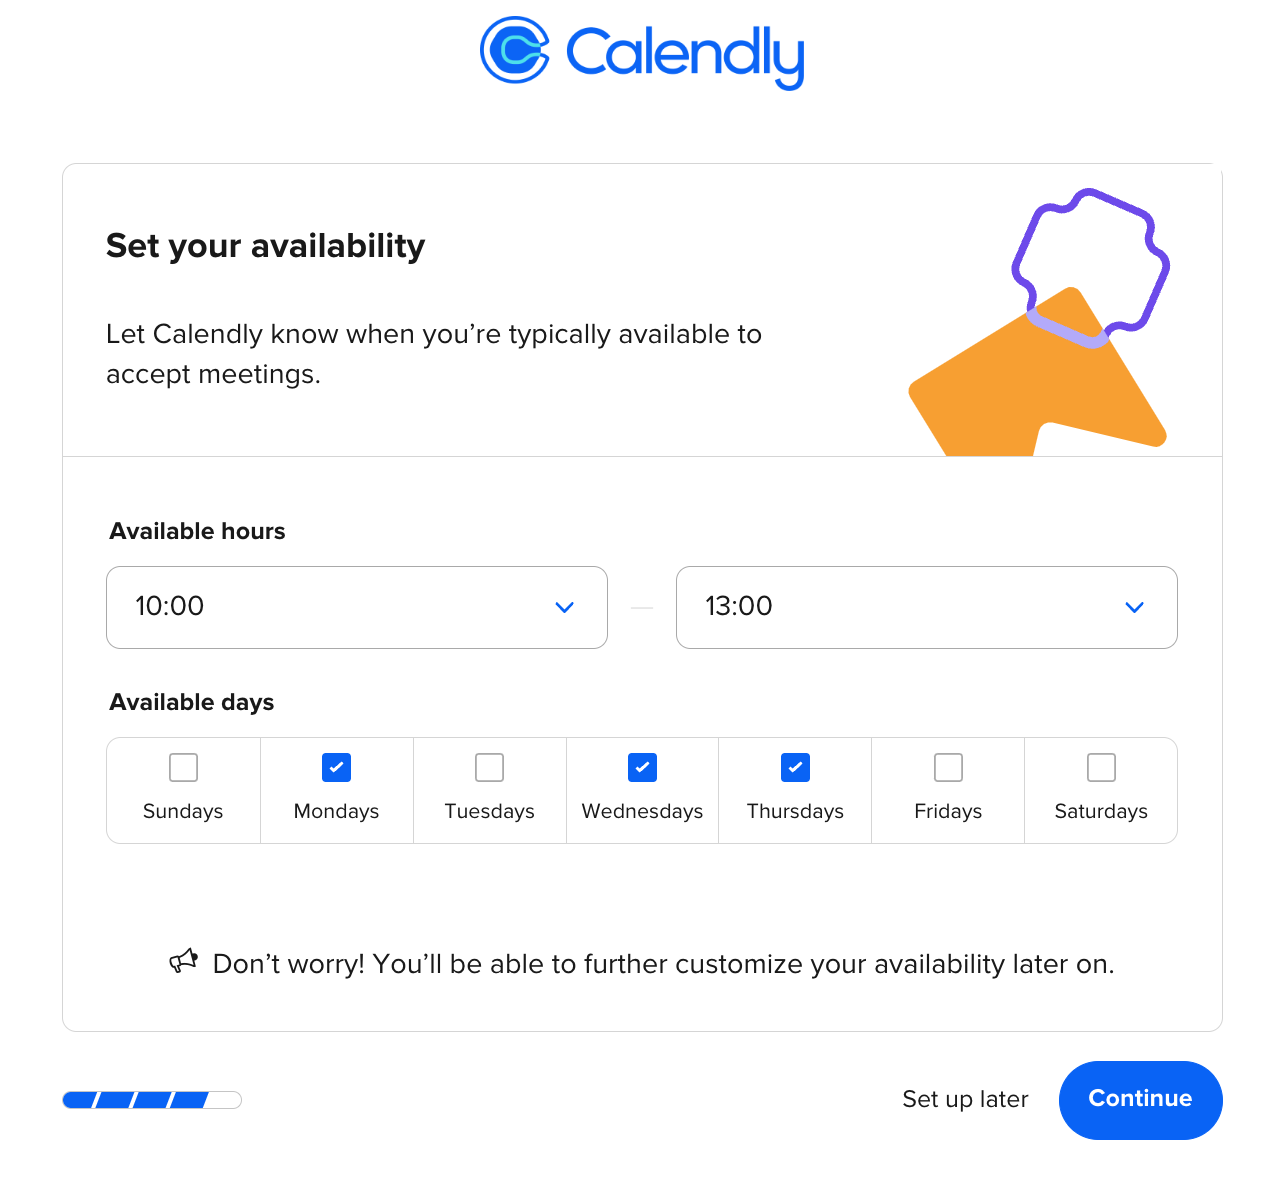 How to set your availability when you first create your Calendly account.